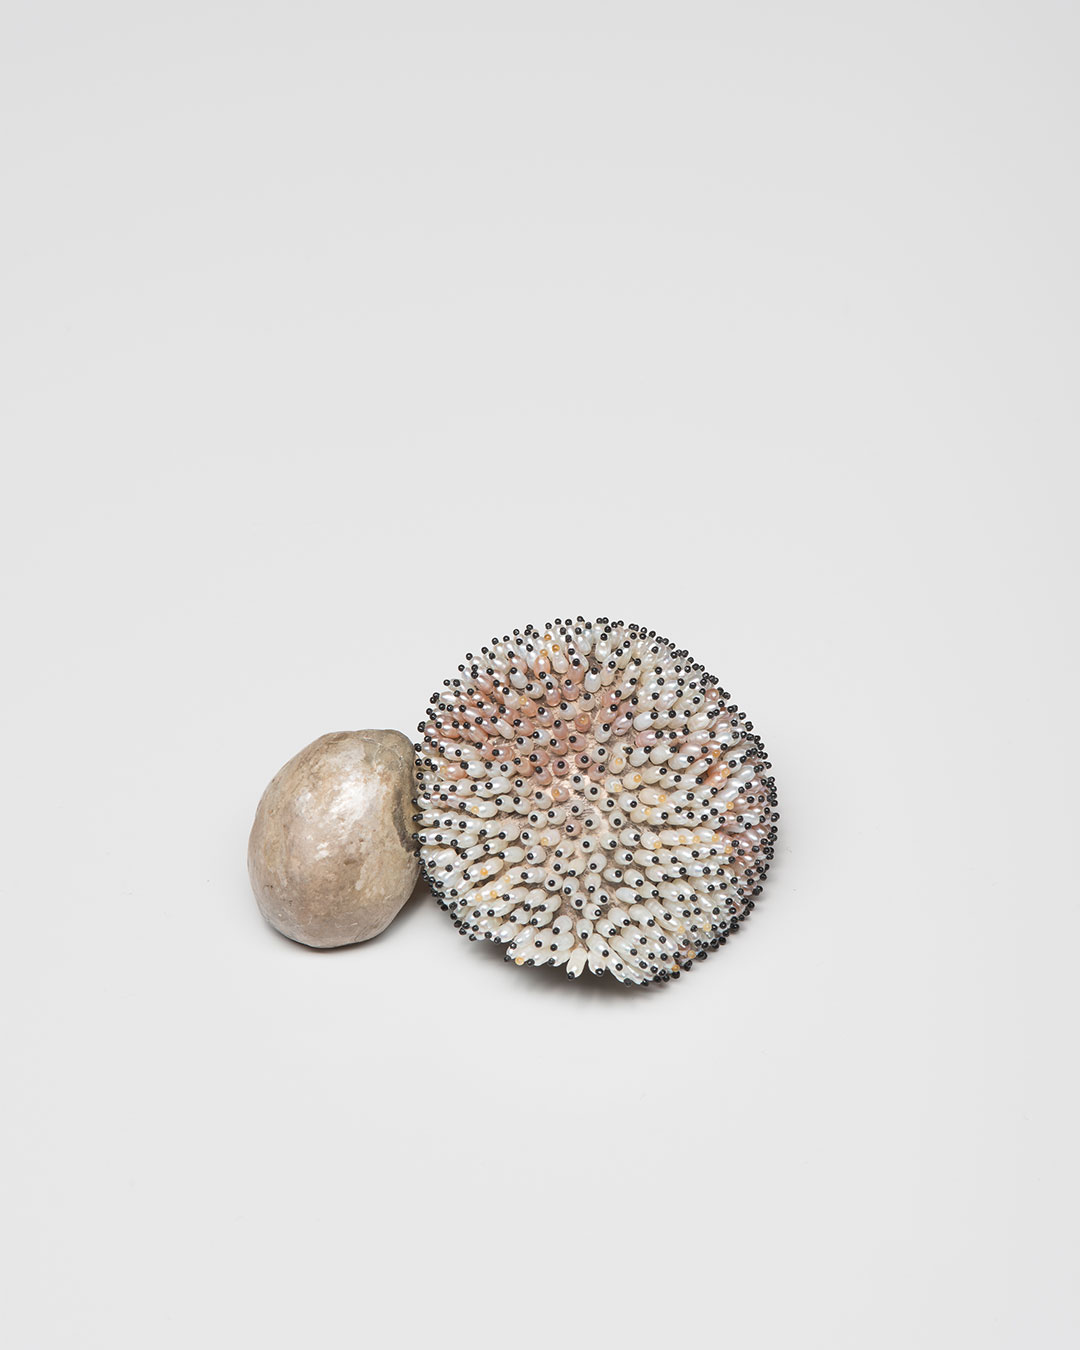 Sam Tho Duong, Look, 2015, brooch; silver, freshwater pearls, nylon, €2100